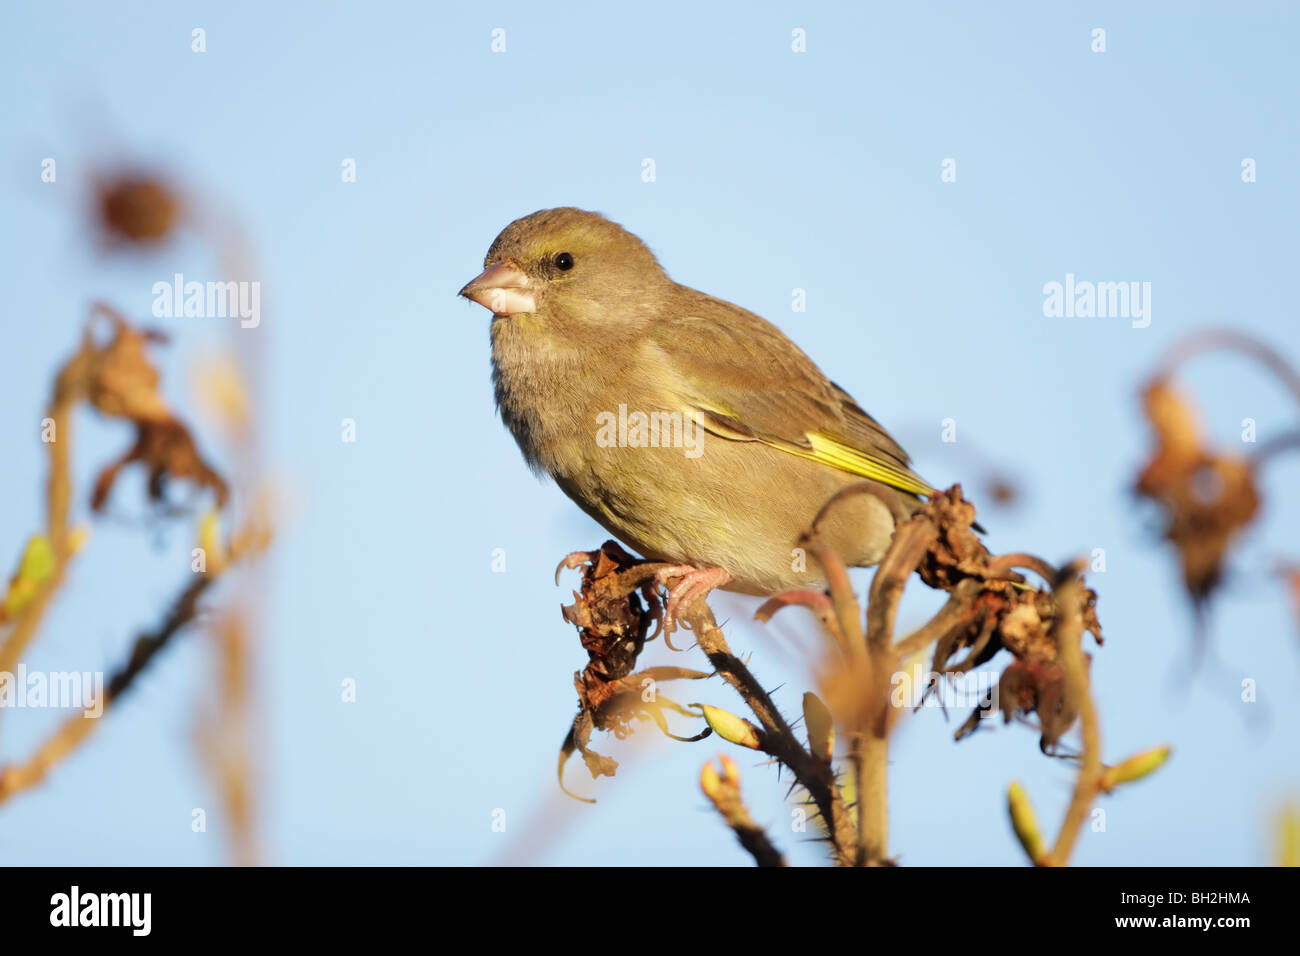 Greenfinch (Carduelis chloris) male perched on seed heads Stock Photo